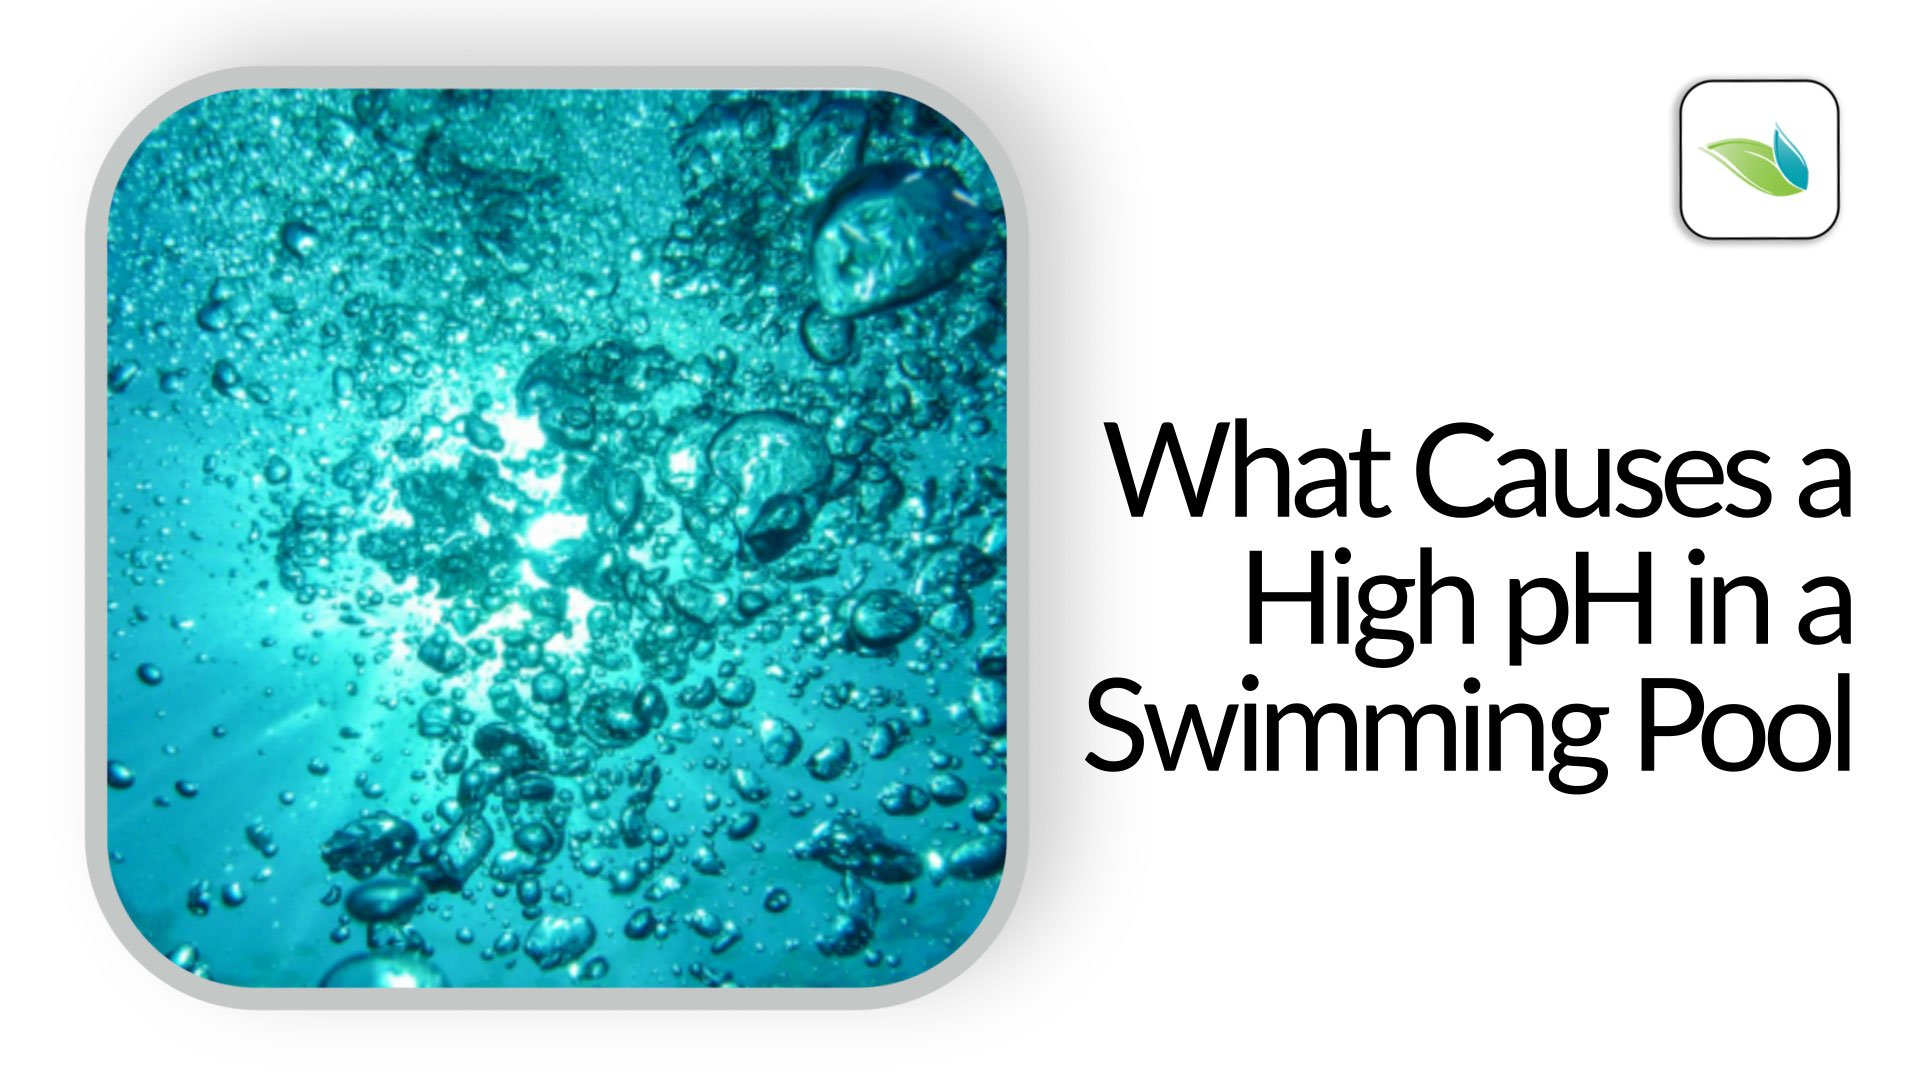 What Causes a High pH in a Swimming Pool?